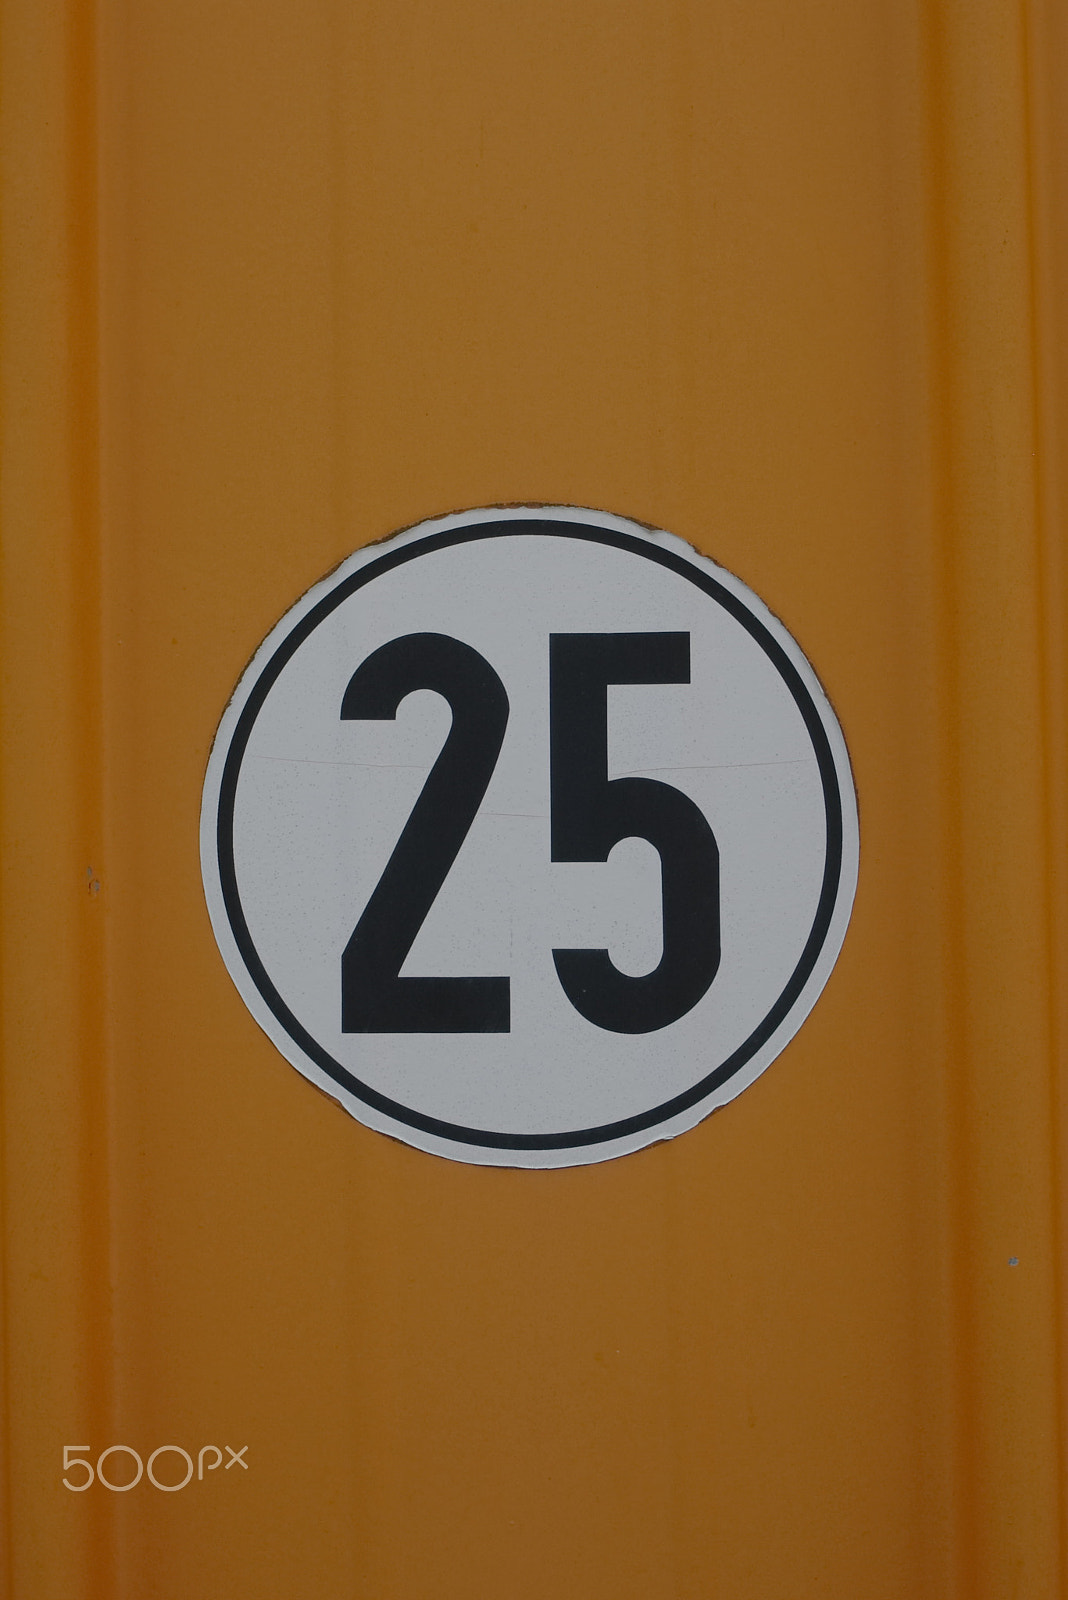 Pentax *ist D sample photo. Speed limit sign 25 photography